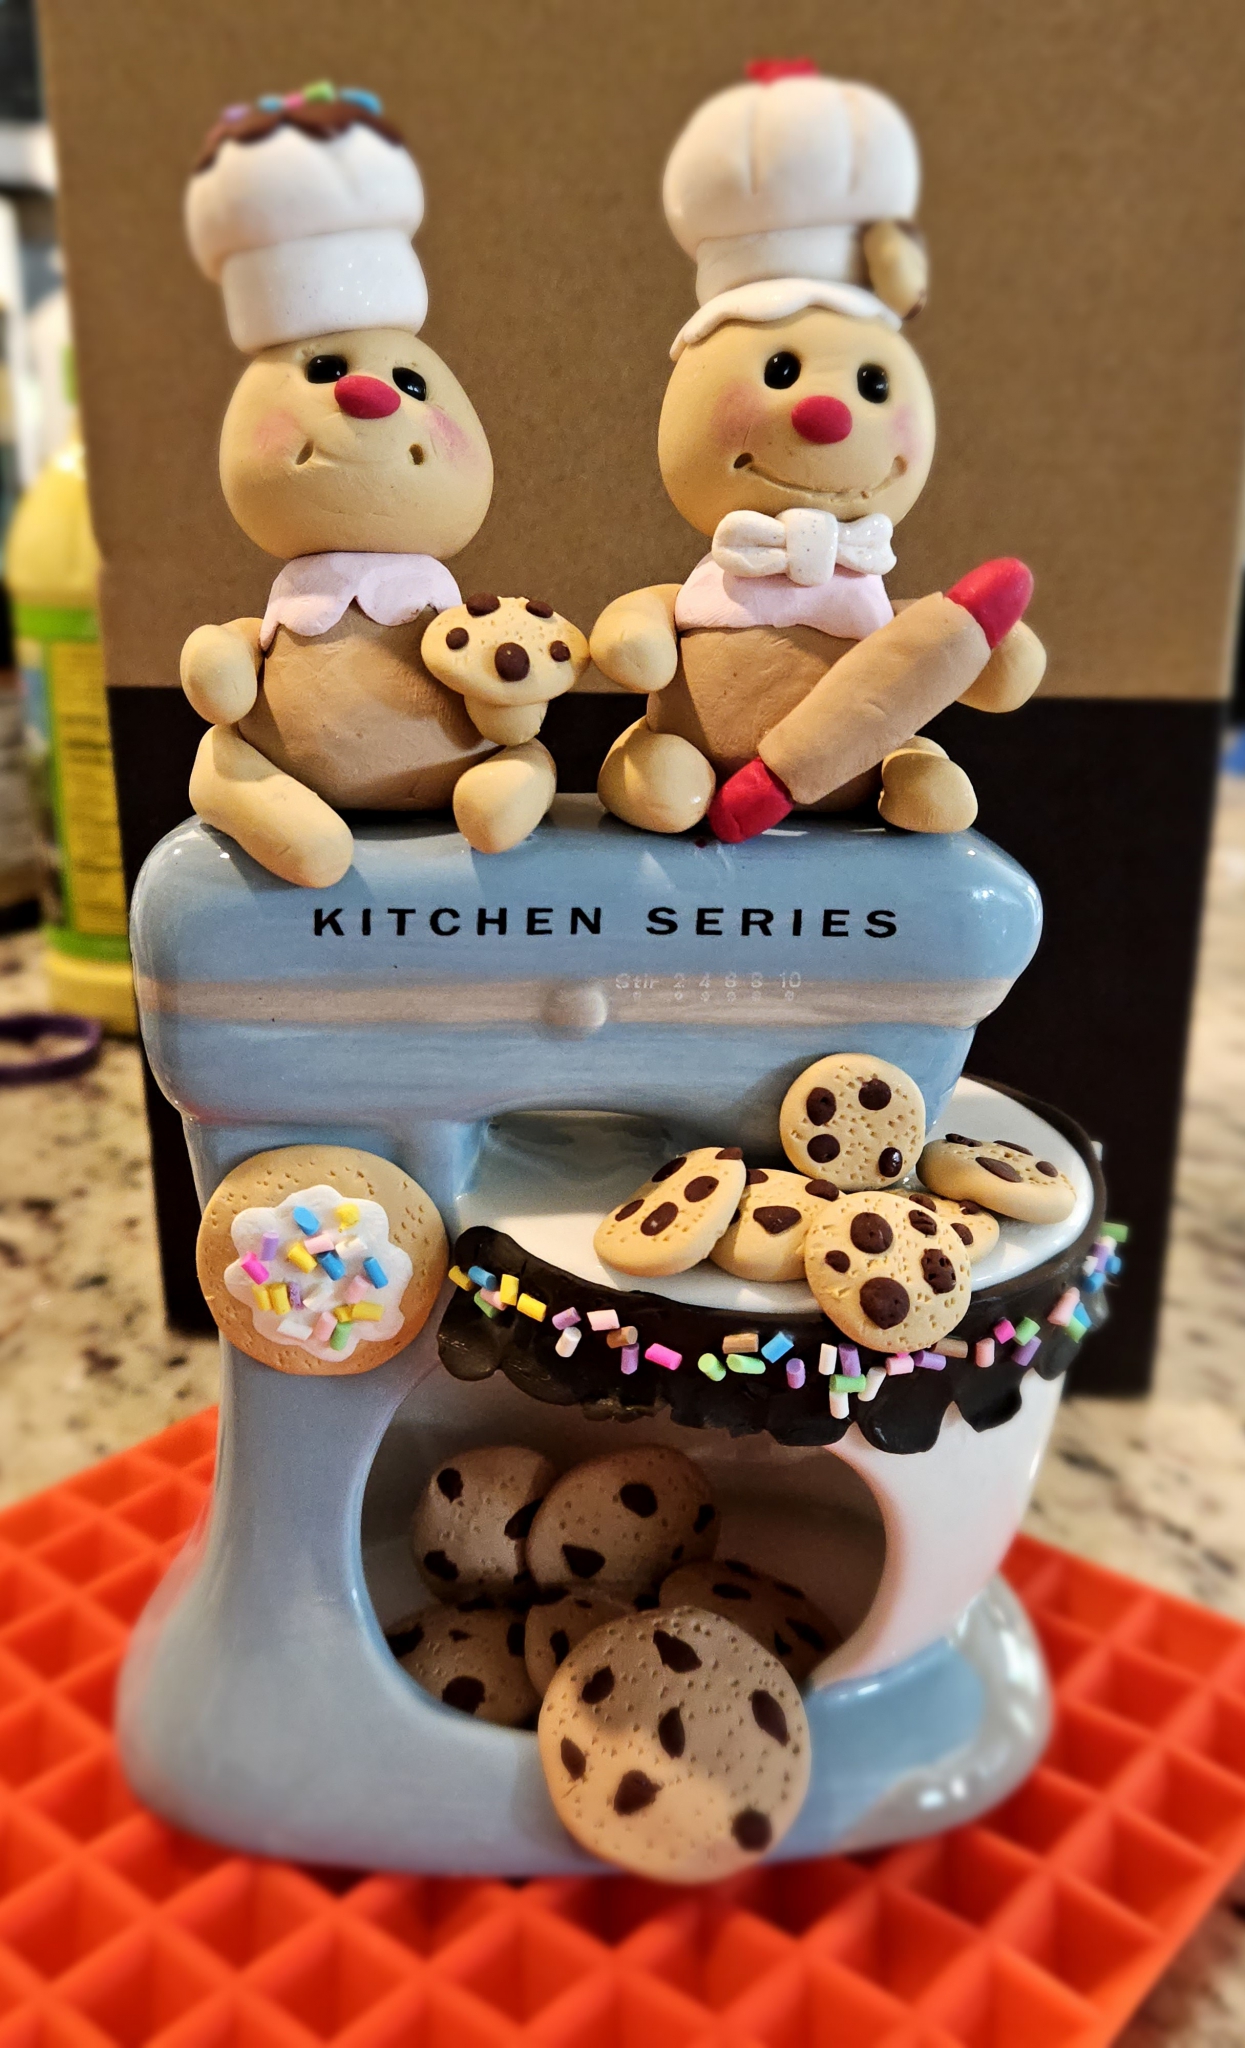 Click here to view Two Gingy Bakers on Mixer by  